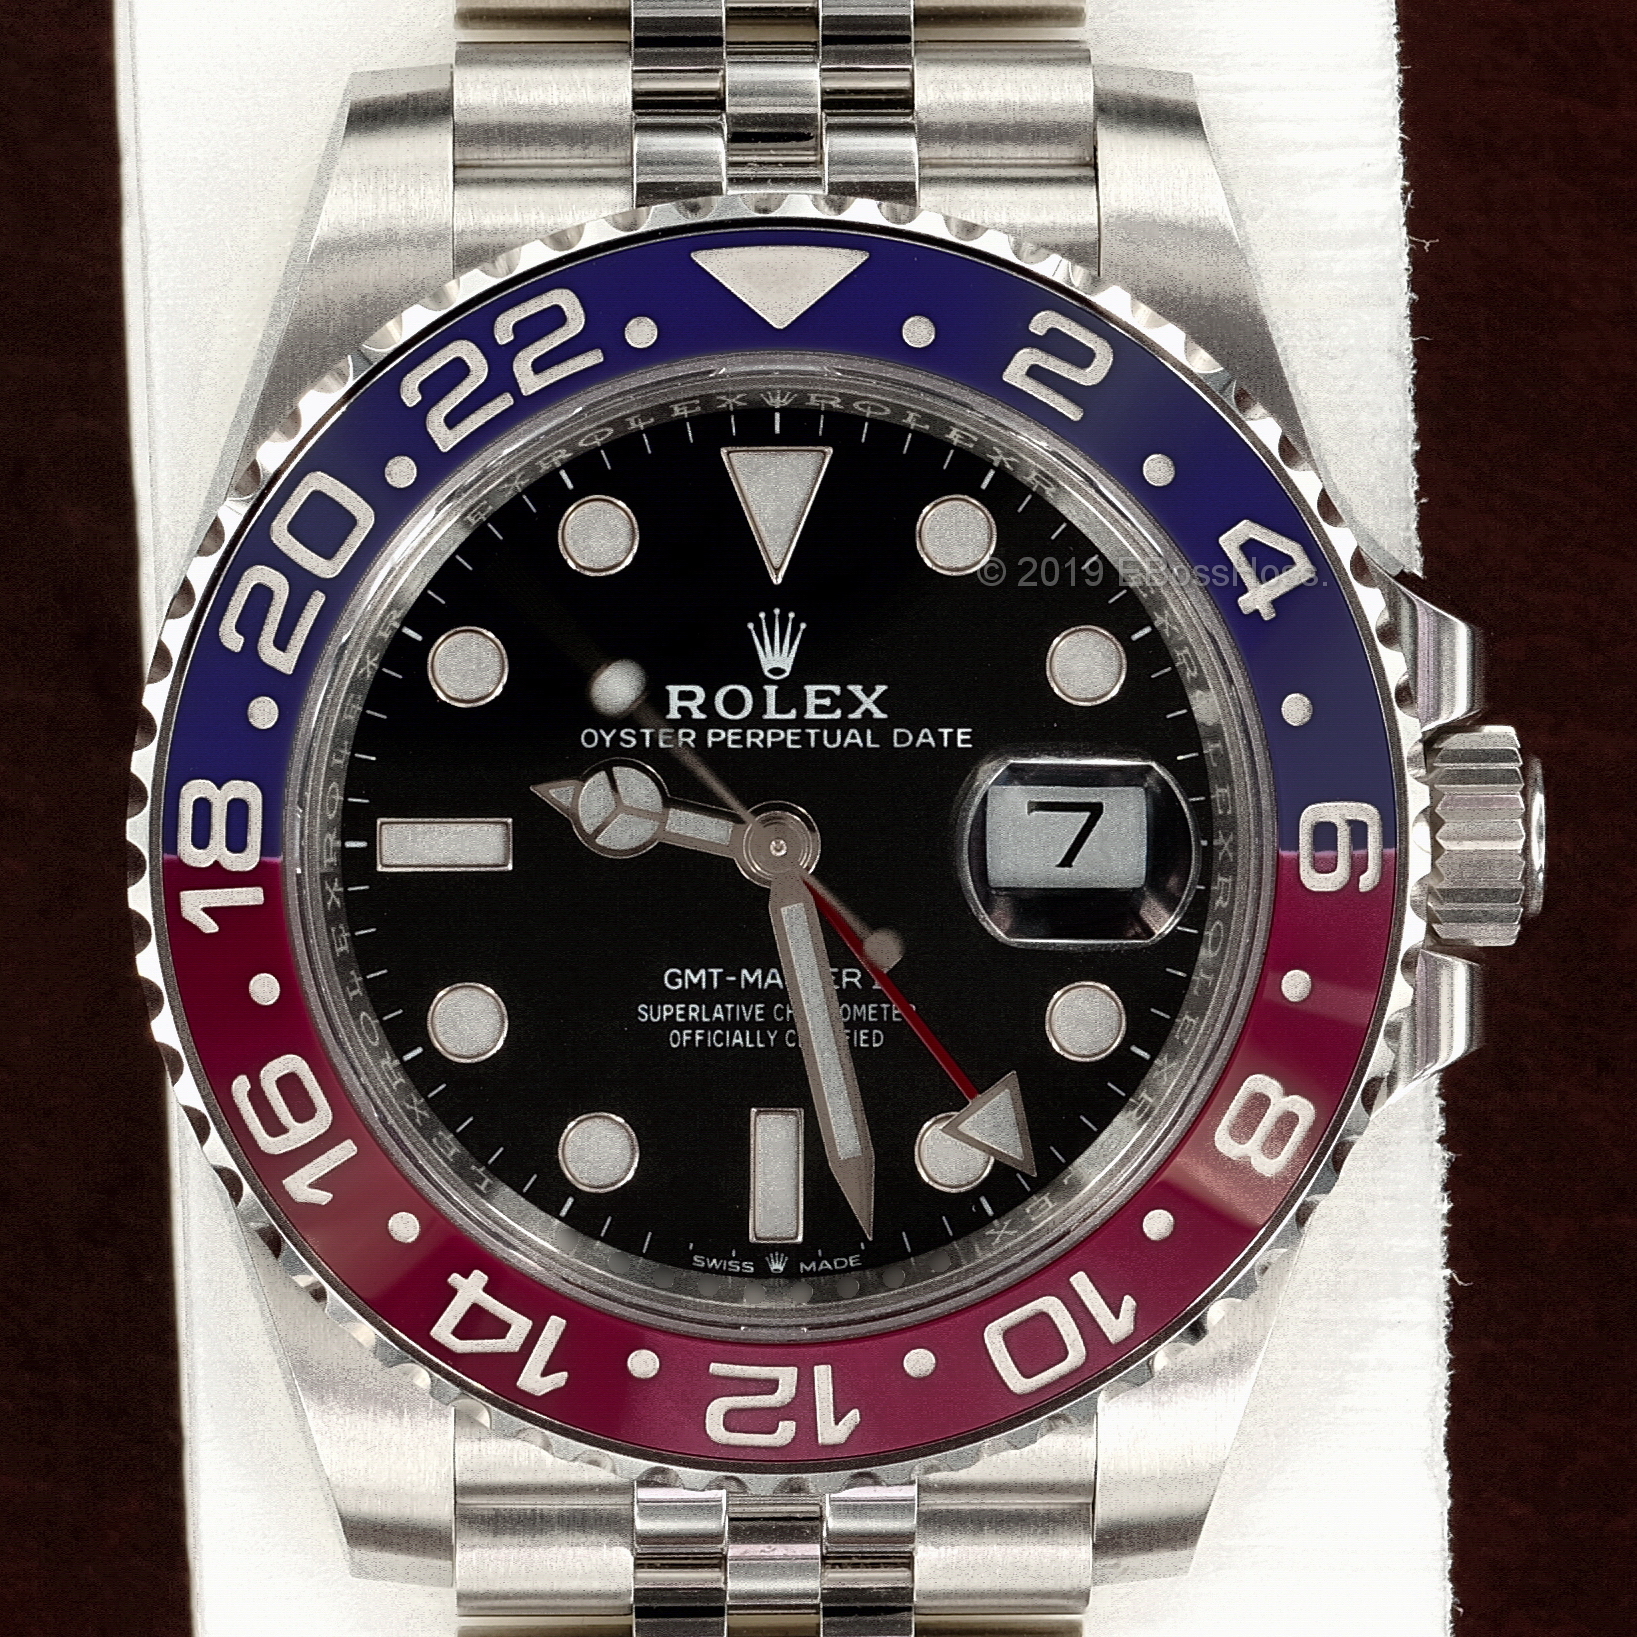  JUST IN ROLEX ... Several models available